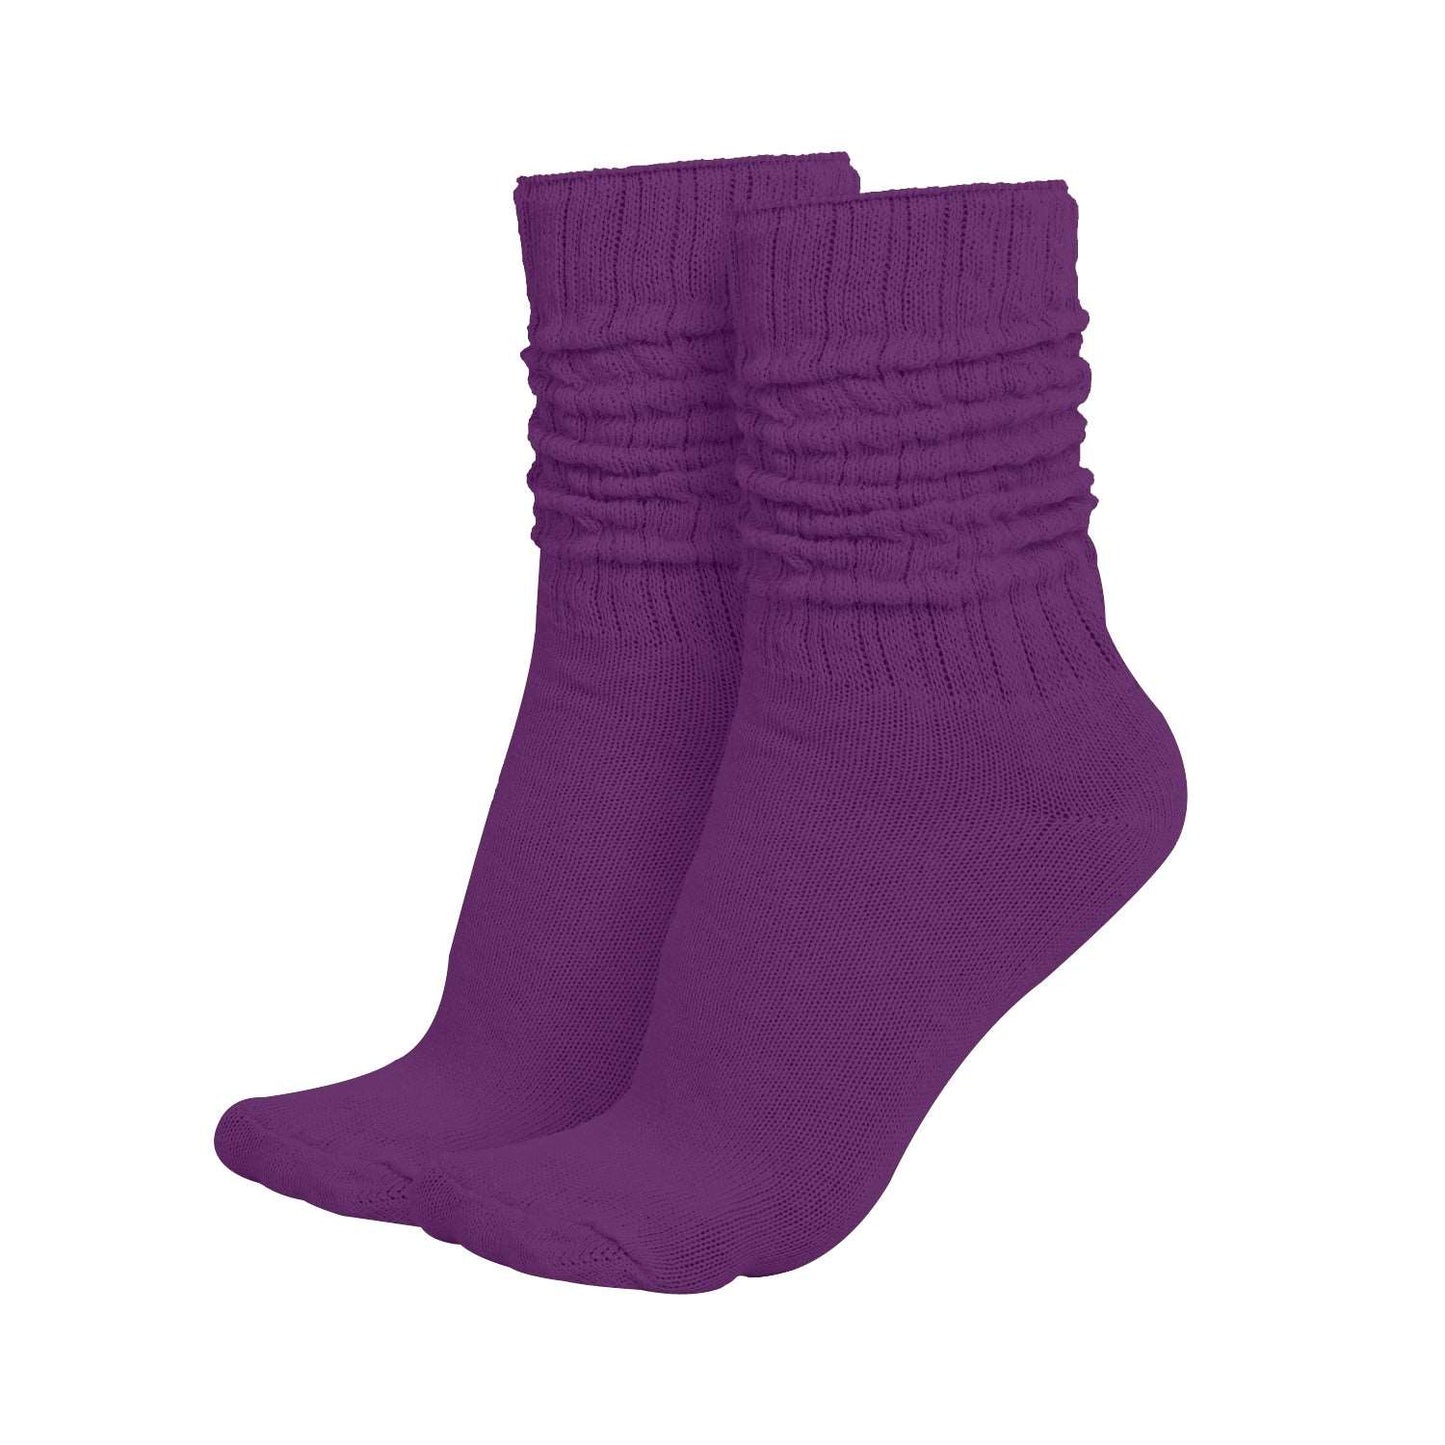 MDR Lightweight Cotton Slouch Socks For Women and Men 1 Pair Made in USA Size 9 to 11 (Dark Purple)